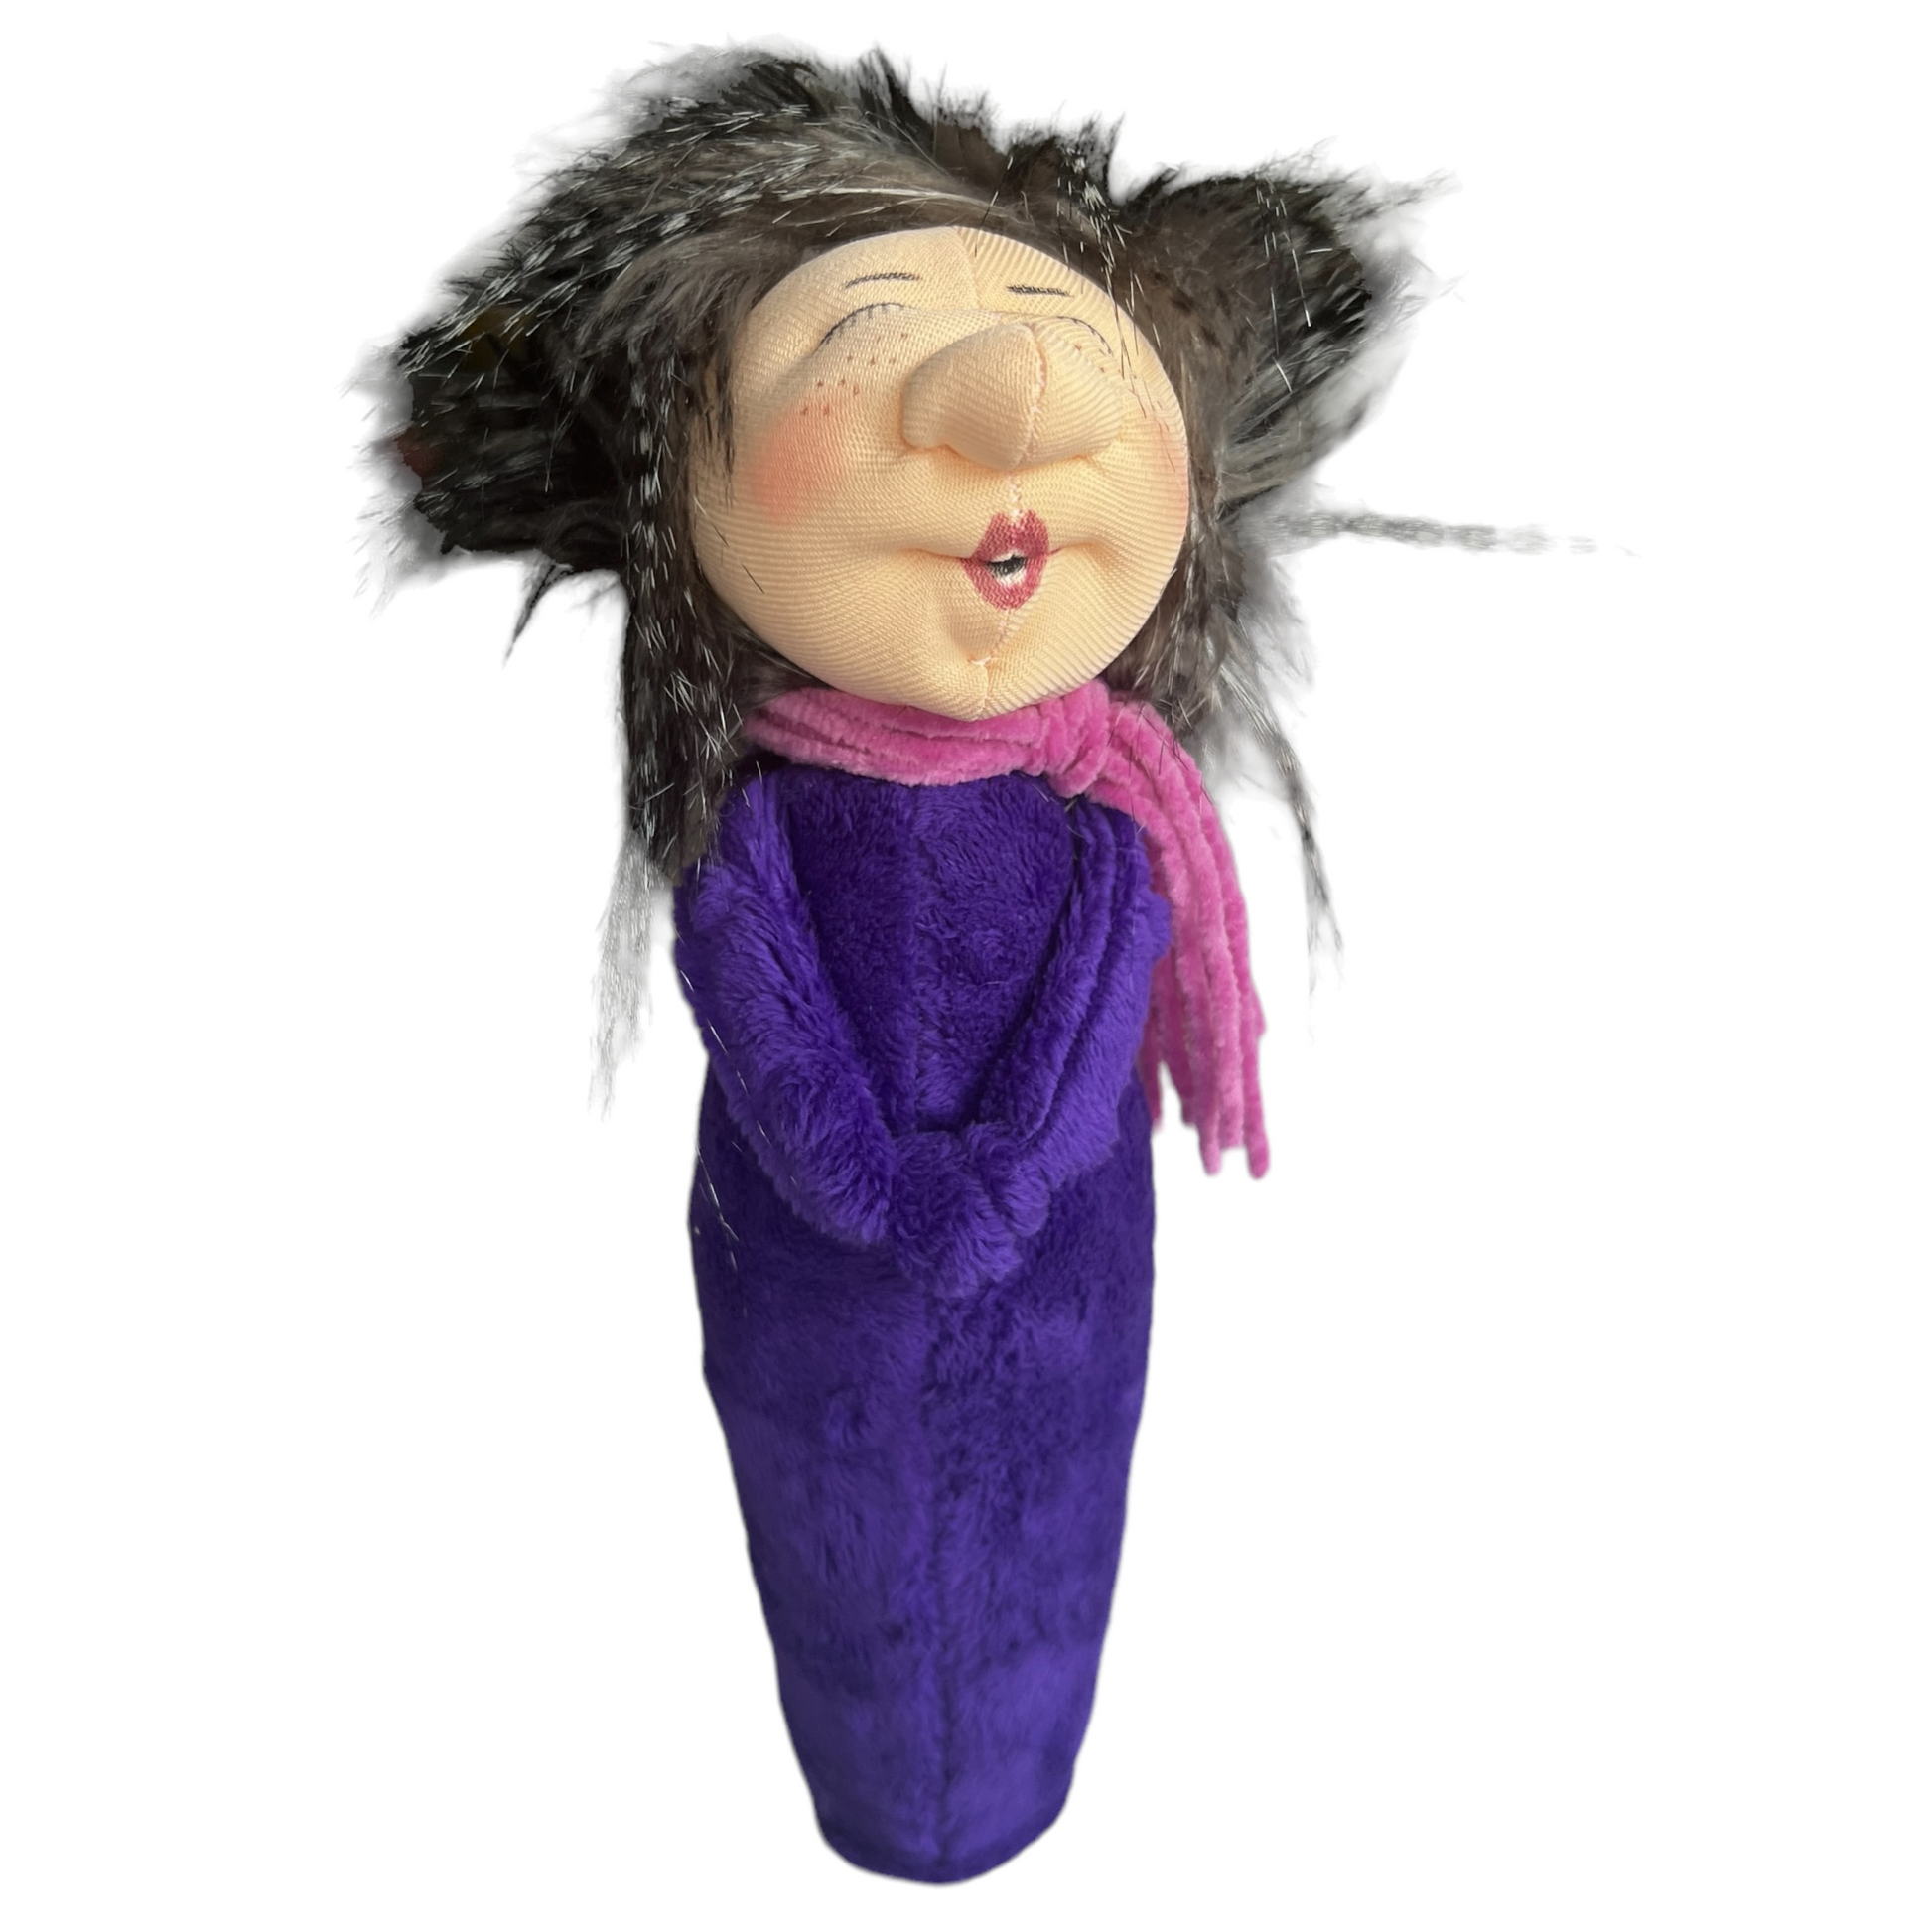 Choir Singers, Large Doll  Splash Quilting Penny / Purple with Pink Scarf  